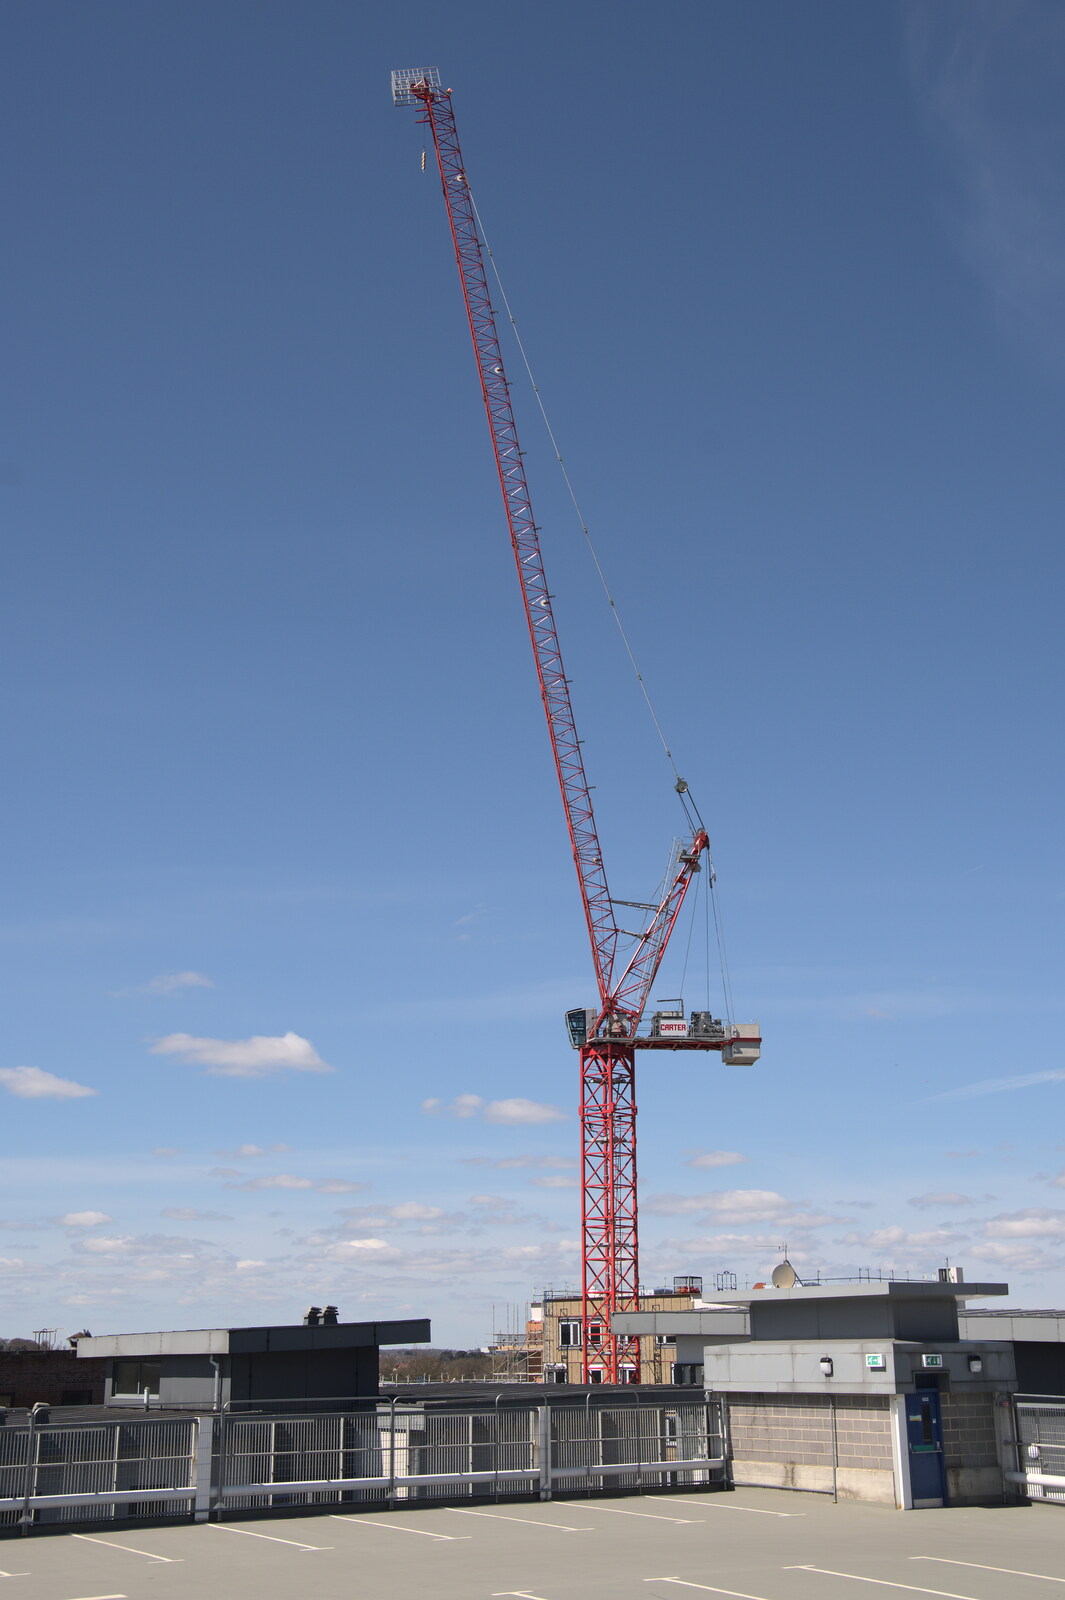 A tall crane looms over the car park from The Death of Debenhams, Rampant Horse Street, Norwich, Norfolk - 17th April 2021